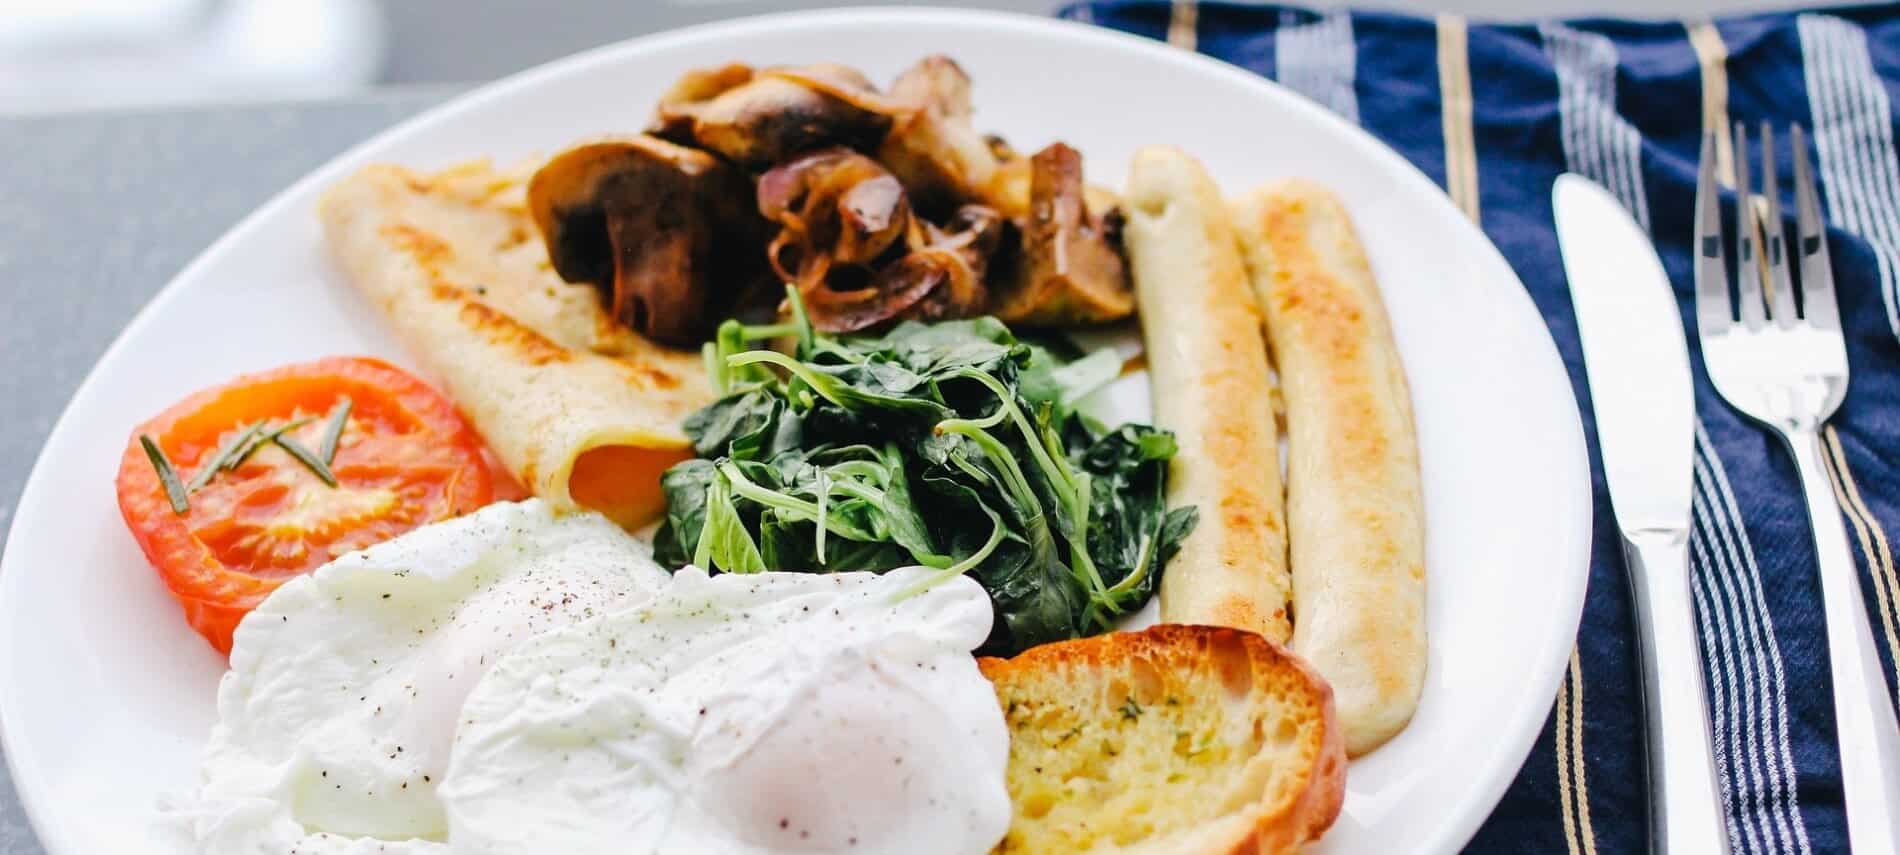 Poached eggs over toast with spinach, chicken sausage and a vegetable dish.